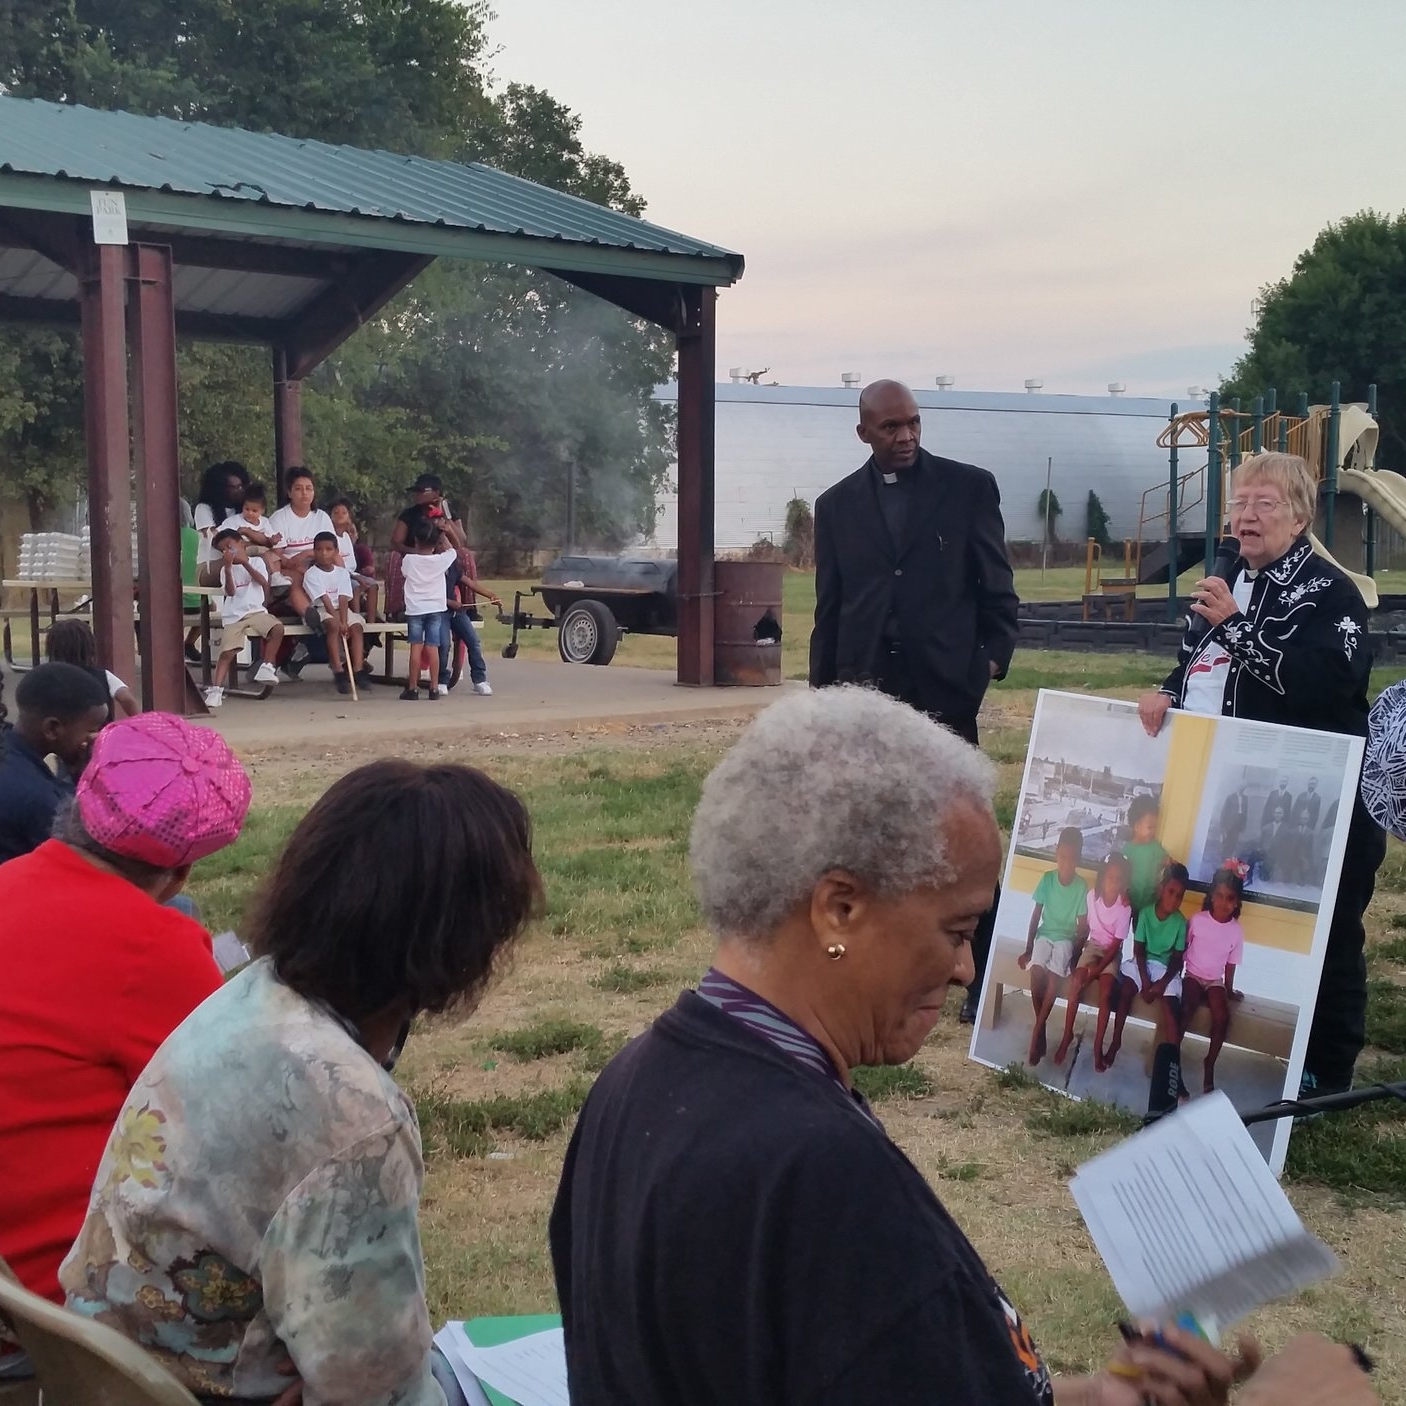 Part 7: Remember2019, Memory and Reflection on Mass Lynching in Phillips County, AR